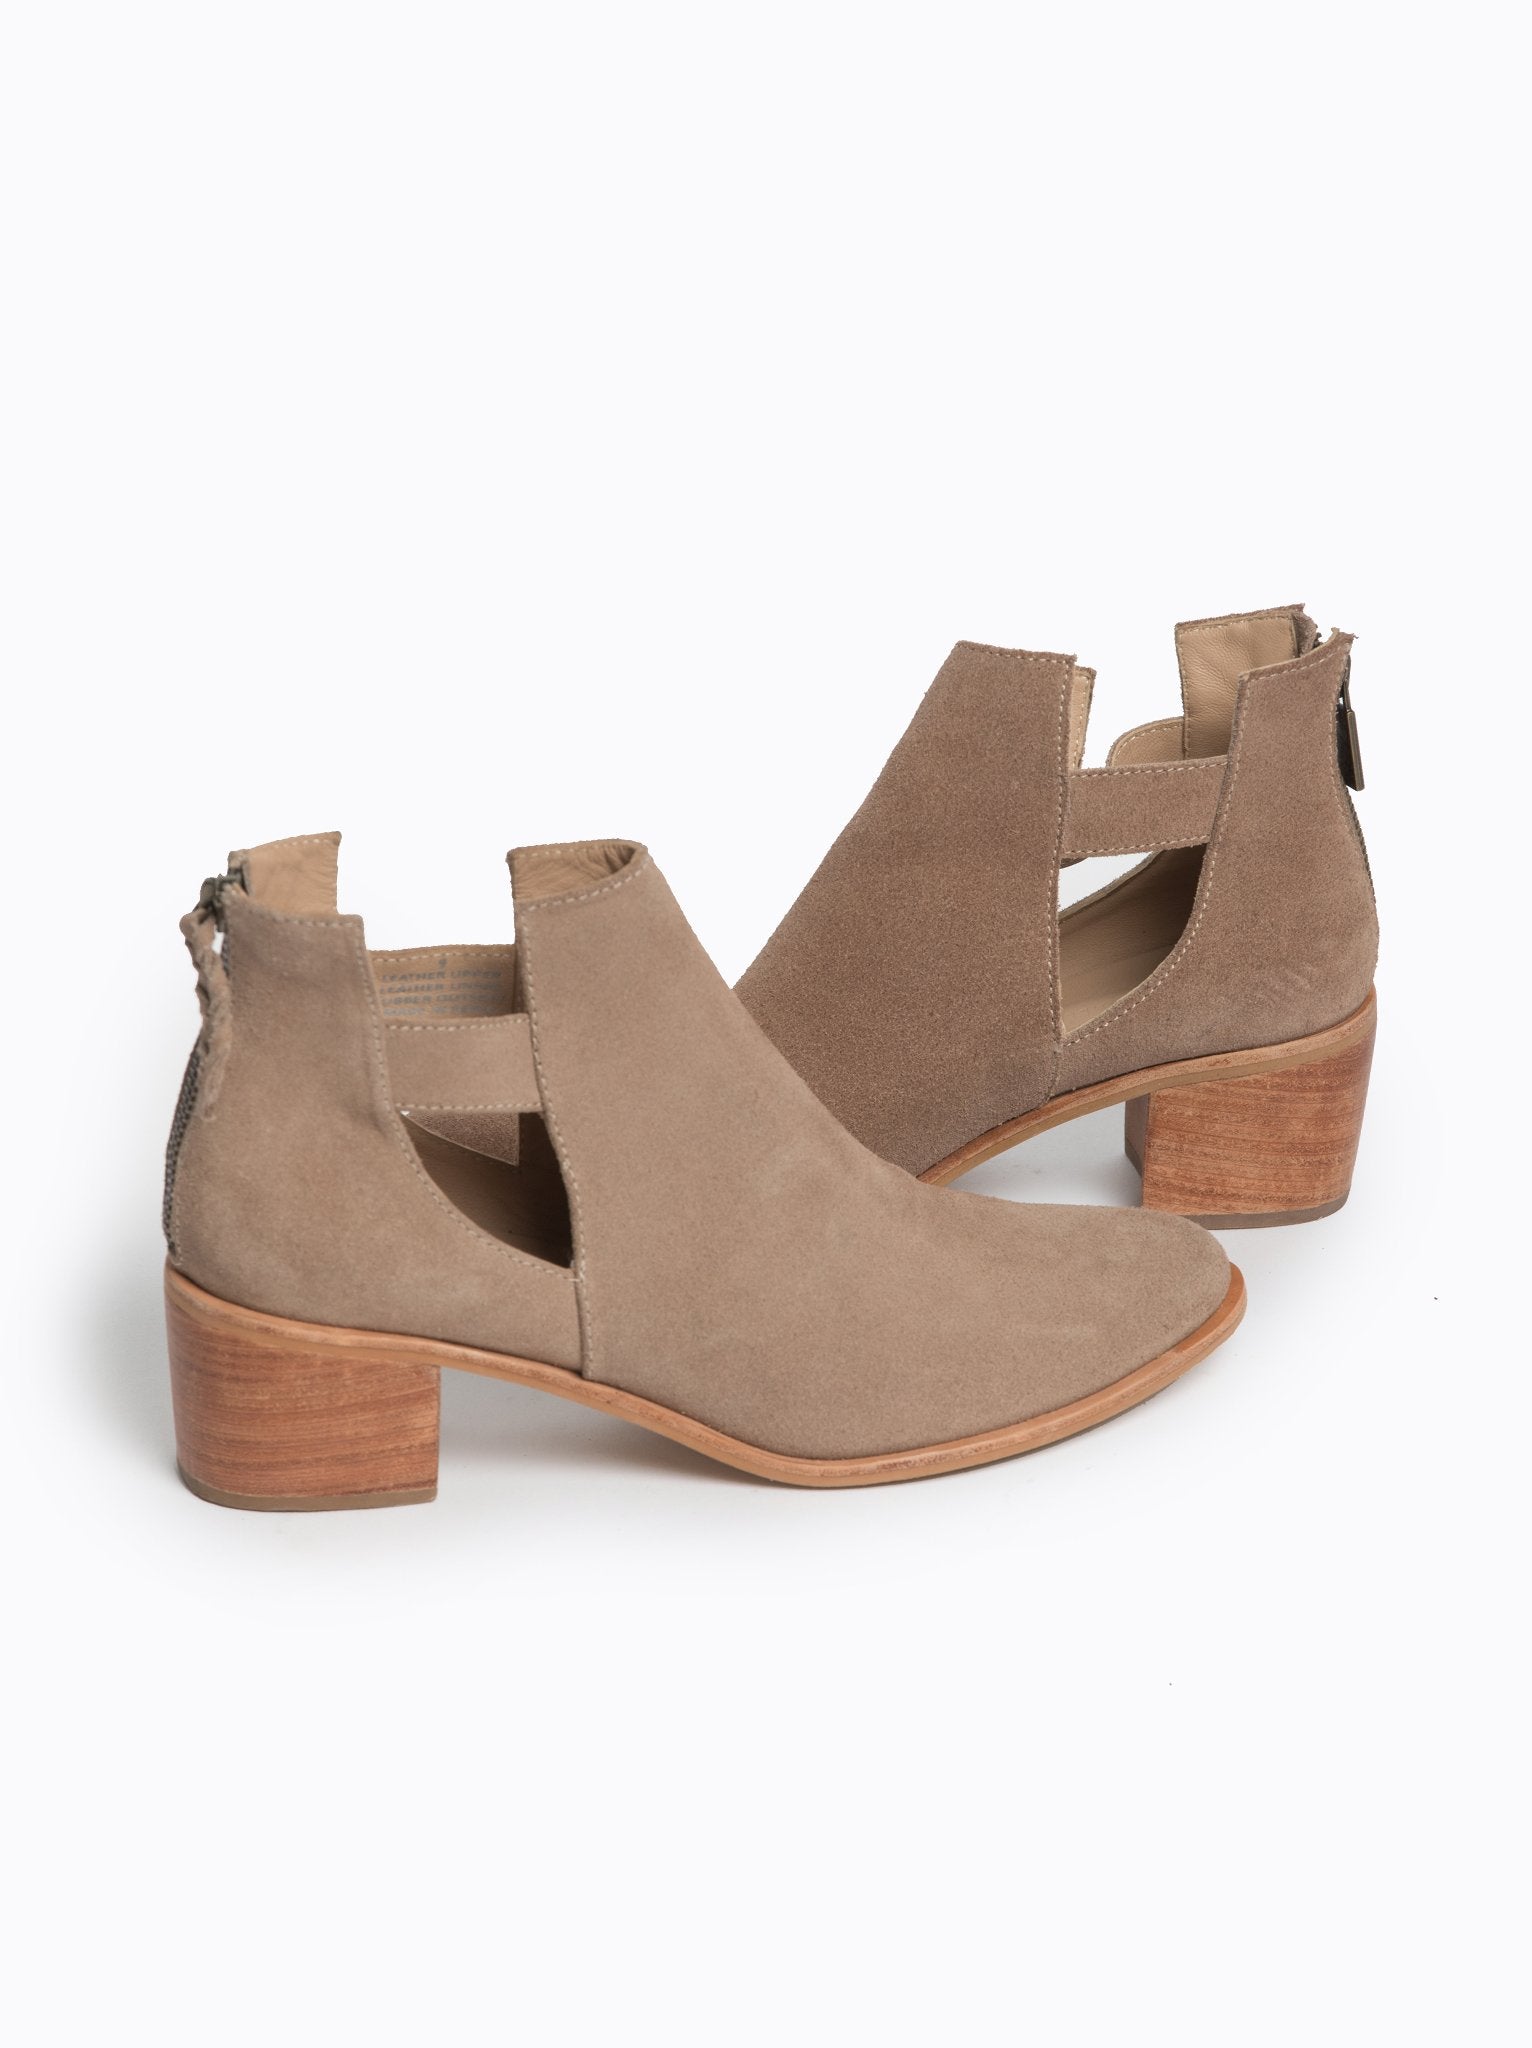 Gamboa Cut Out Bootie | ABLE